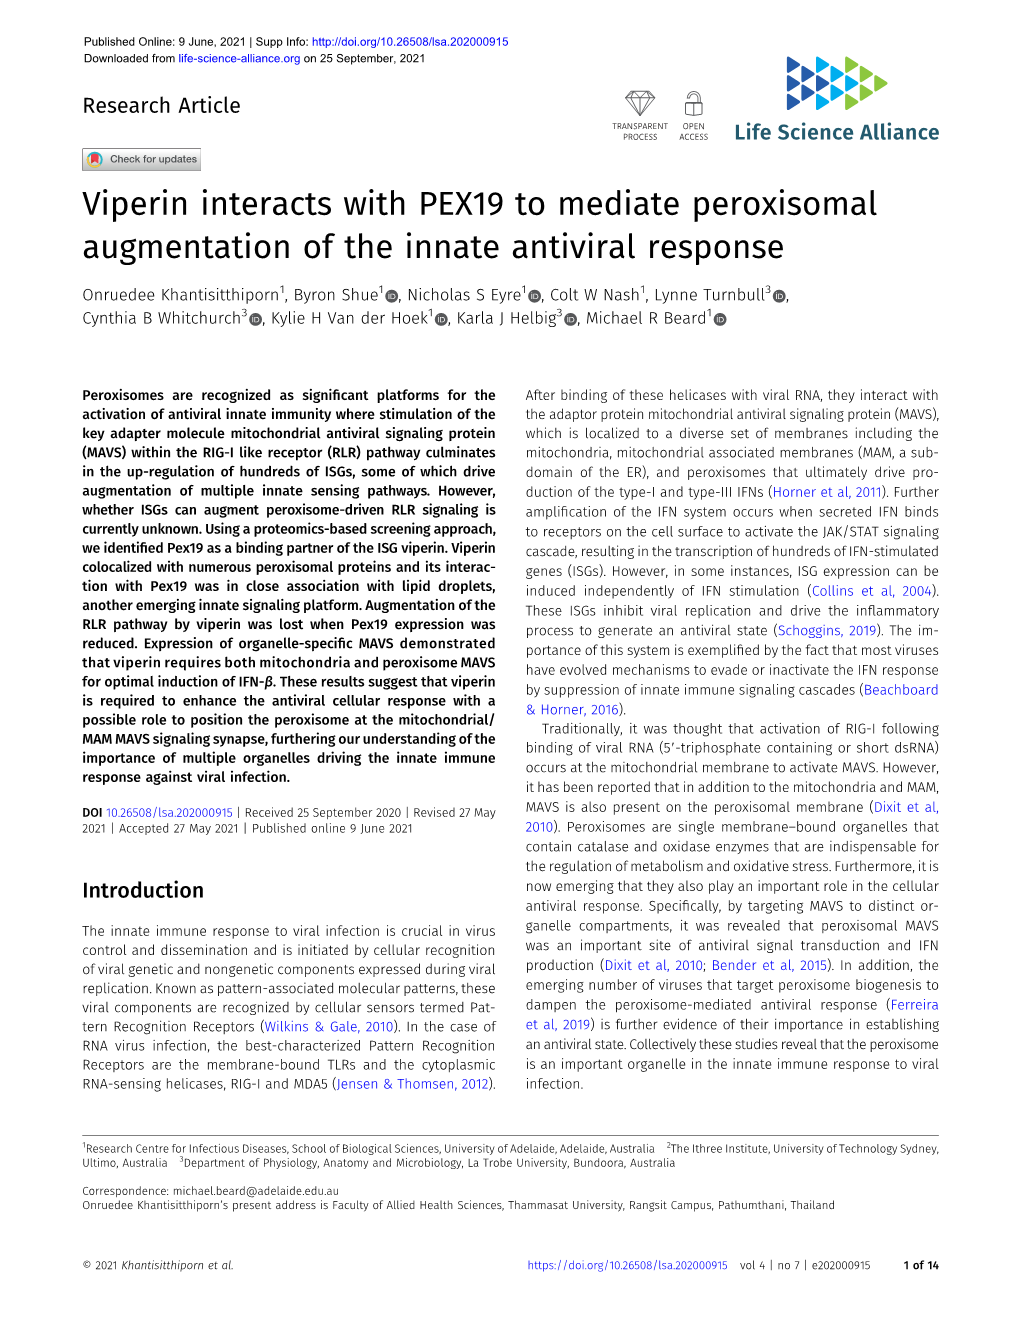 Viperin Interacts with PEX19 to Mediate Peroxisomal Augmentation of the Innate Antiviral Response